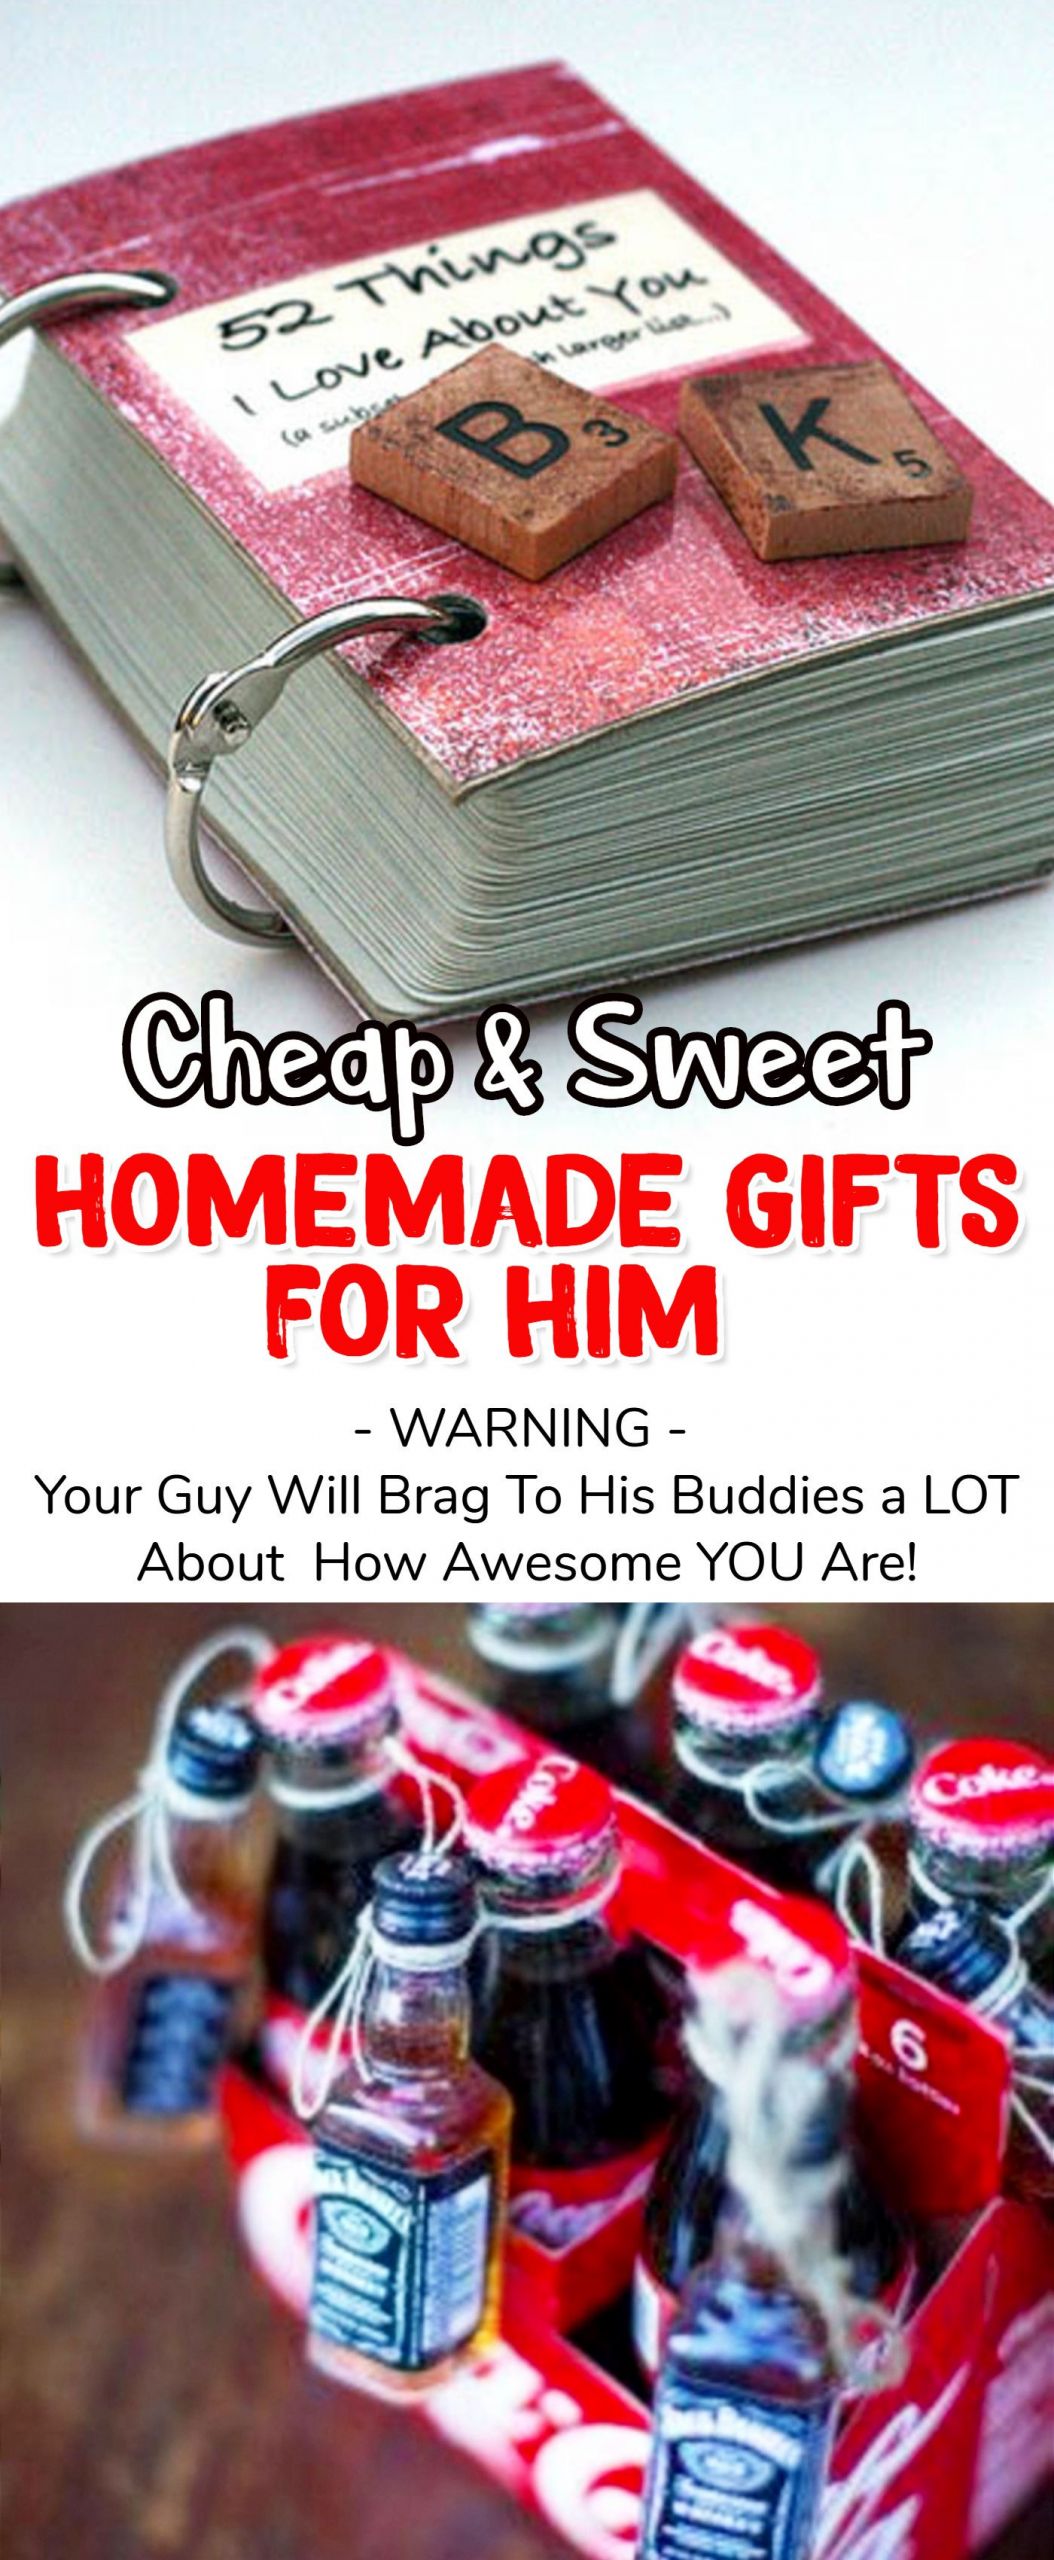 Homemade Gift Ideas For Boyfriend
 Homemade Gift Ideas For Him 26 Romantic DIY Gifts To